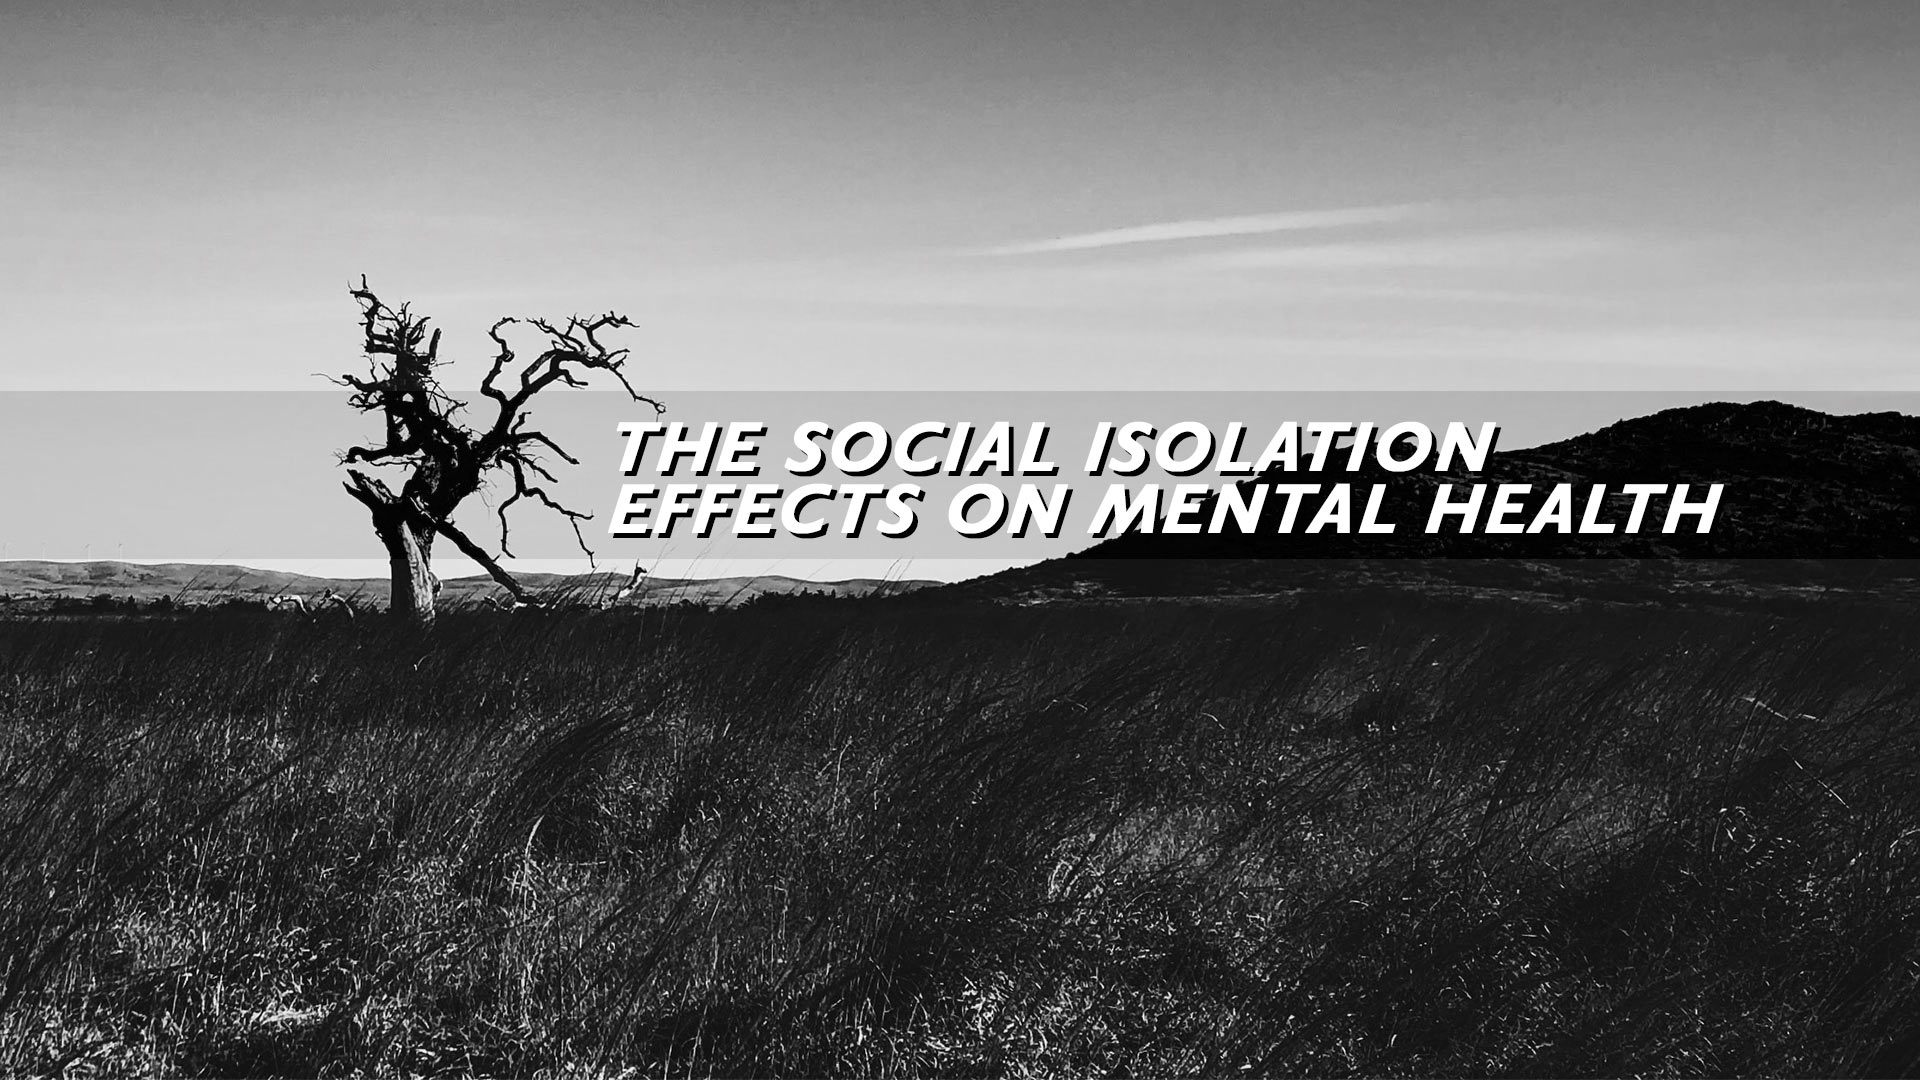 The Social Isolation Effects on Mental Health